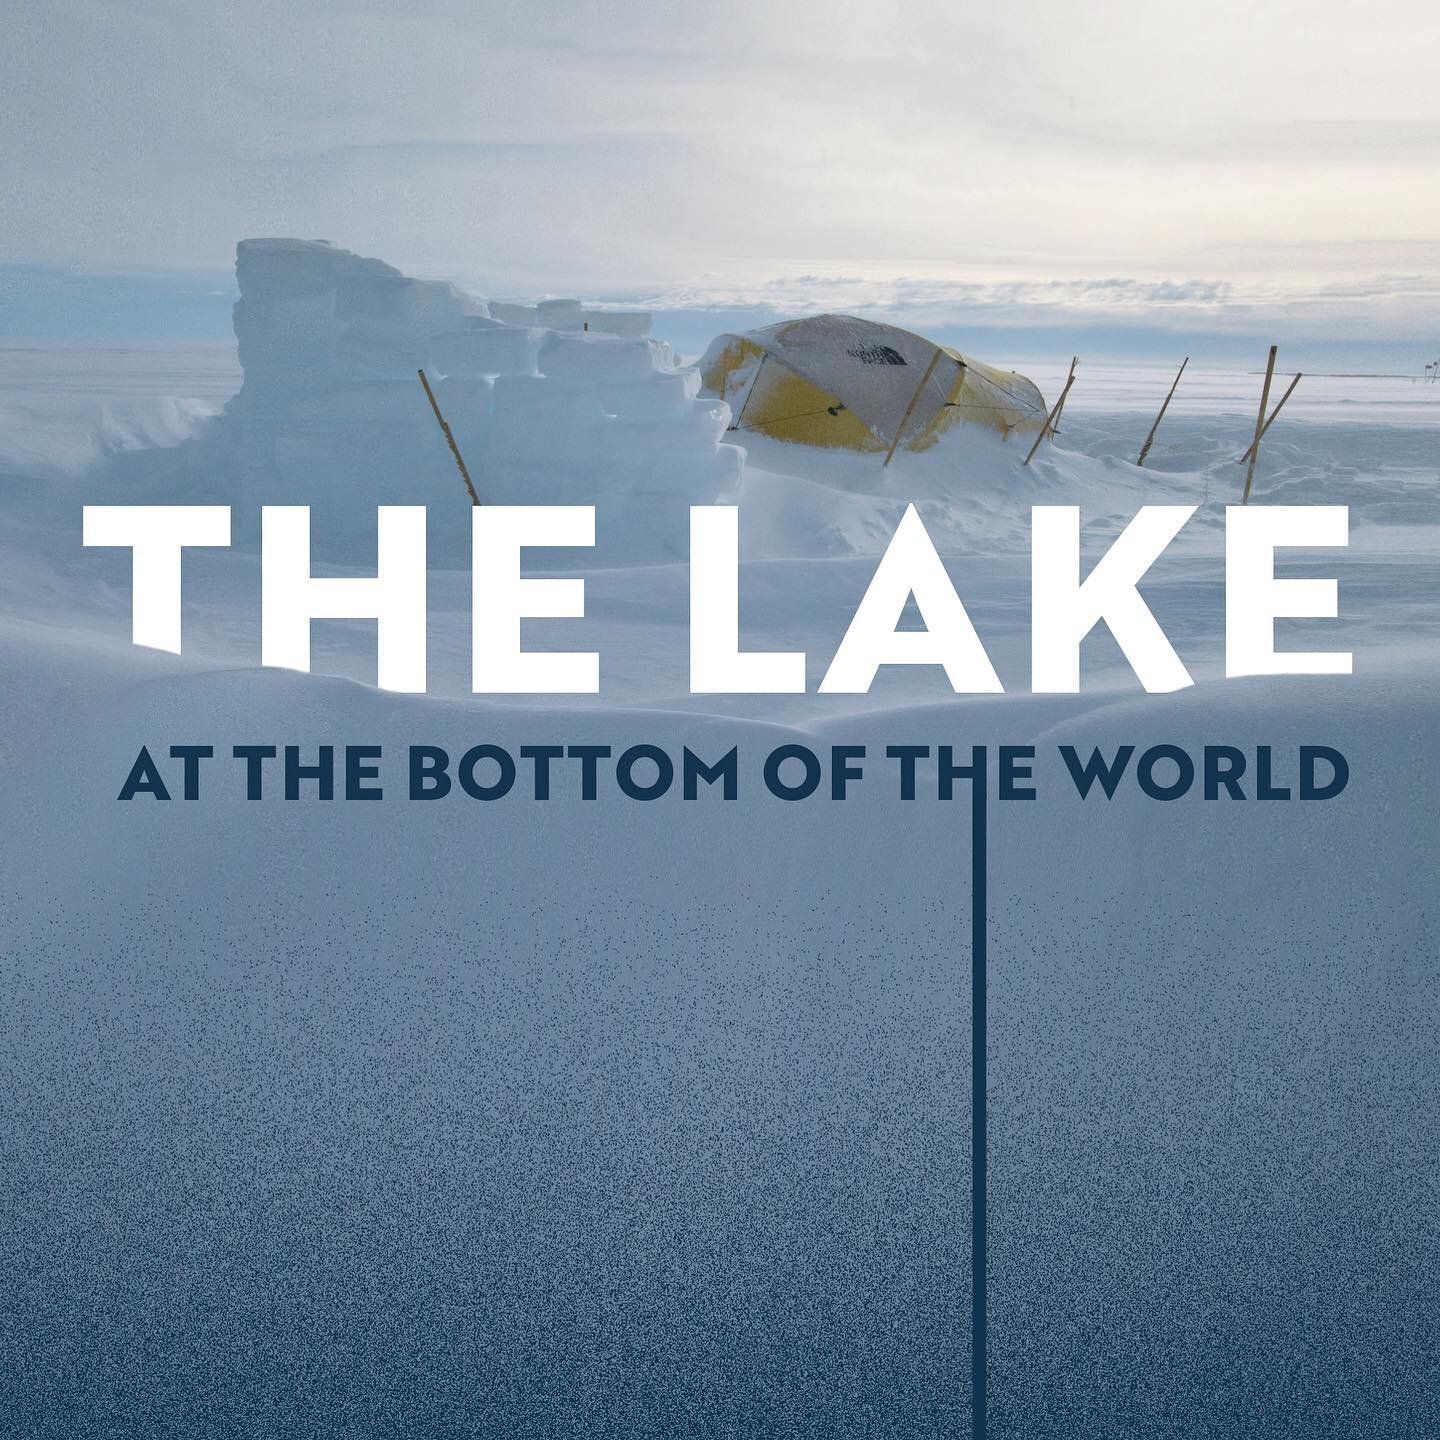 Haven&rsquo;t seen a live screening of The Lake at the Bottom of the World yet? Then come to Oakland, to the Chabot Space and Science Center Saturday December 17th at 1pm! Q&amp;A afterwards with some of the film + science team. We can&rsquo;t wait!